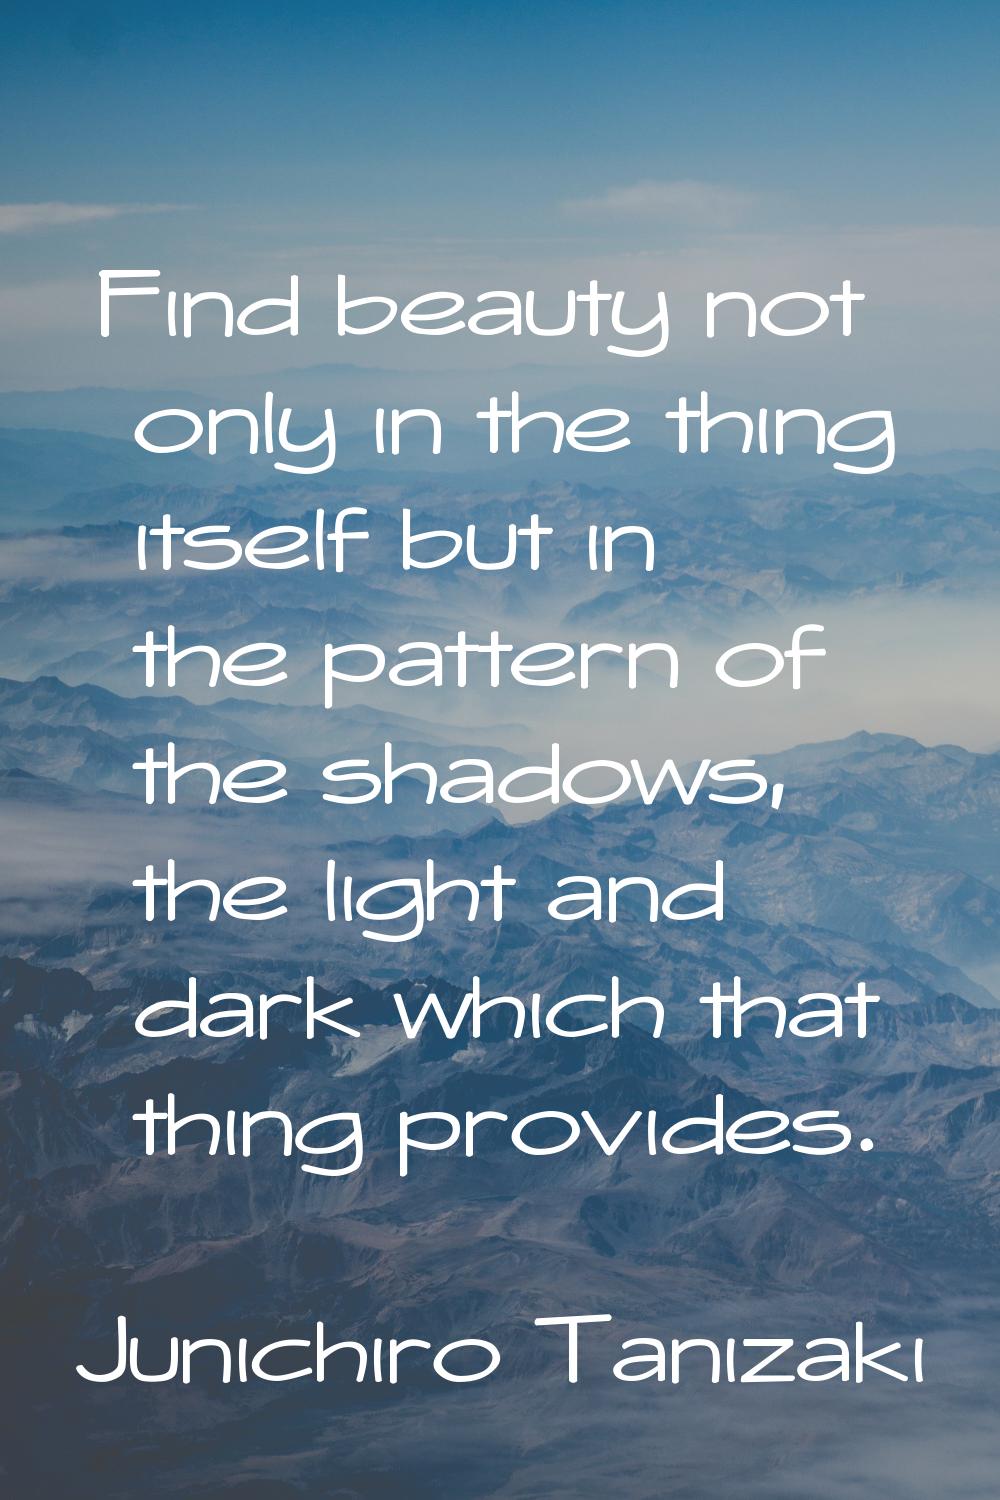 Find beauty not only in the thing itself but in the pattern of the shadows, the light and dark whic